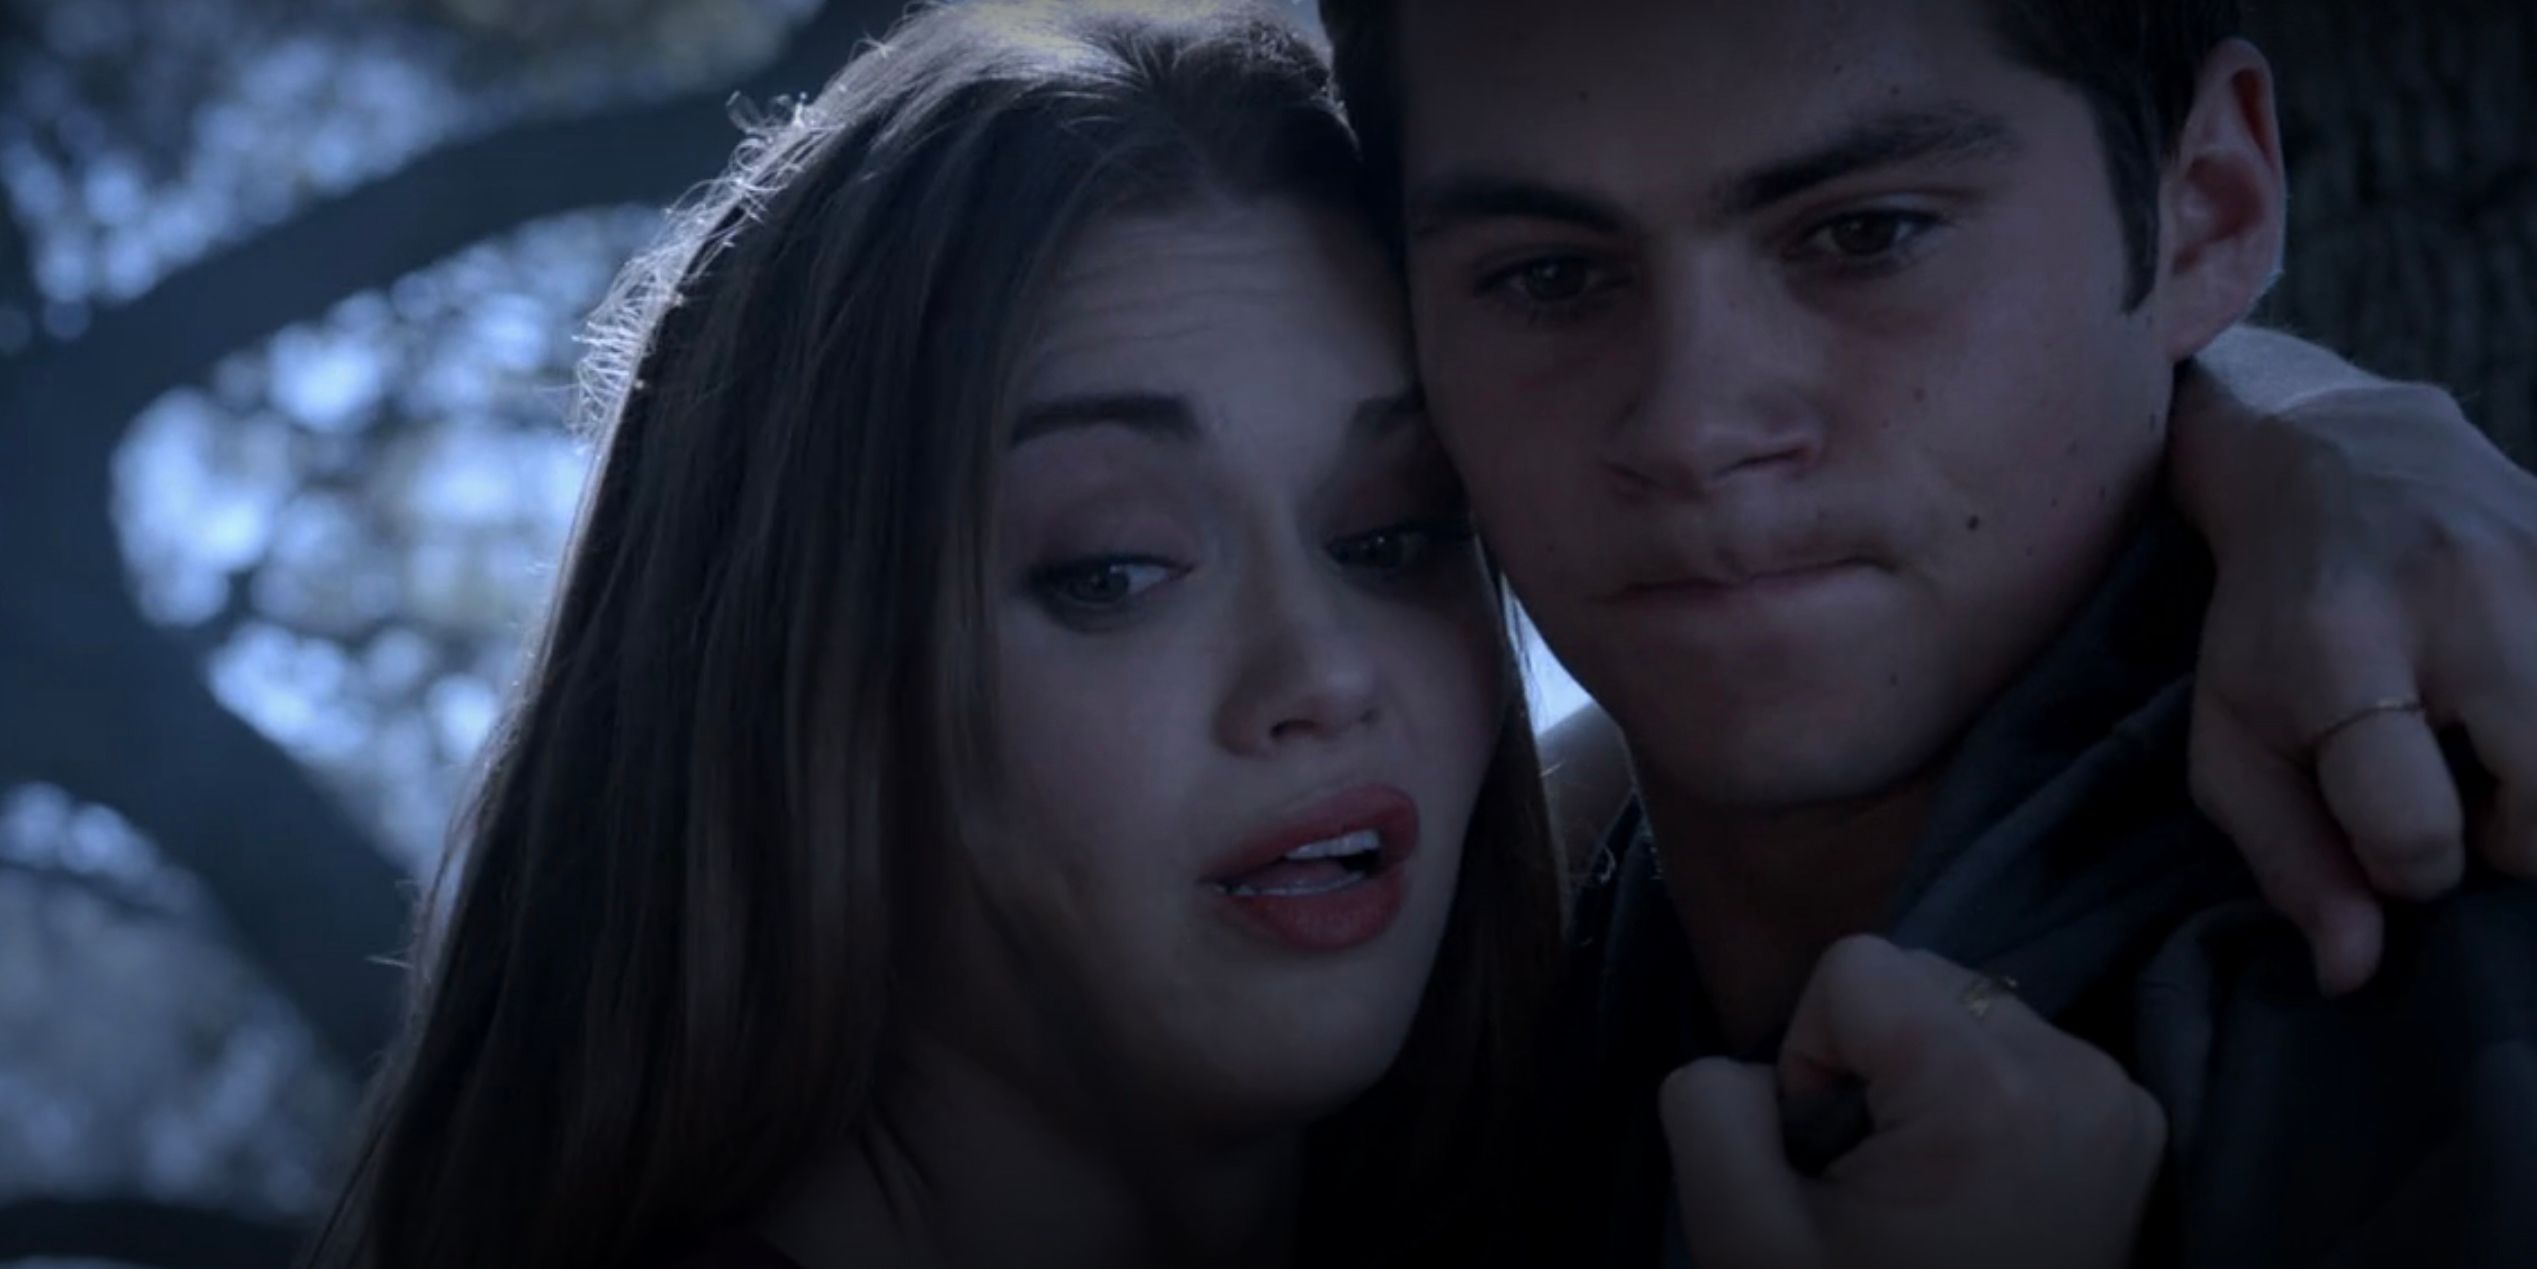 Teen Wolf 10 Best Stiles & Lydia Moments Of All Time Ranked